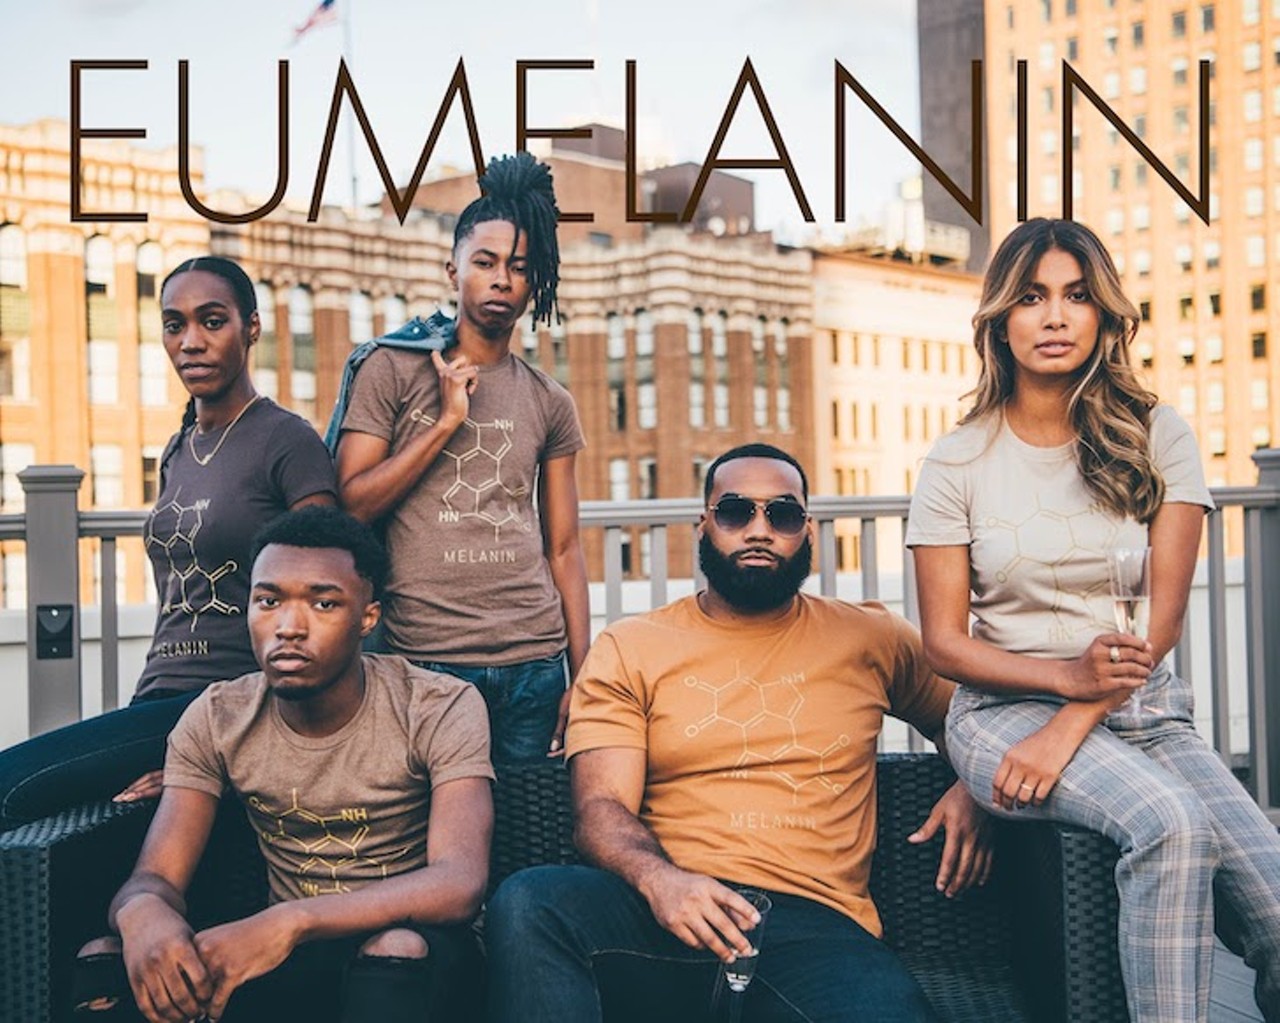 Eumelanin
eumelanin.com
Fashion brand Eumelanin&#146;s namesake comes from the most abundant type of melanin in brown and black skin and hair. Eumelanin was founded by a Detroit native &#147;to address issues of colorism and redefine what it means to be beautiful in every shade; combining Science, Self-love, and Style.&#148;
Photo via Eumelanin/Facebook